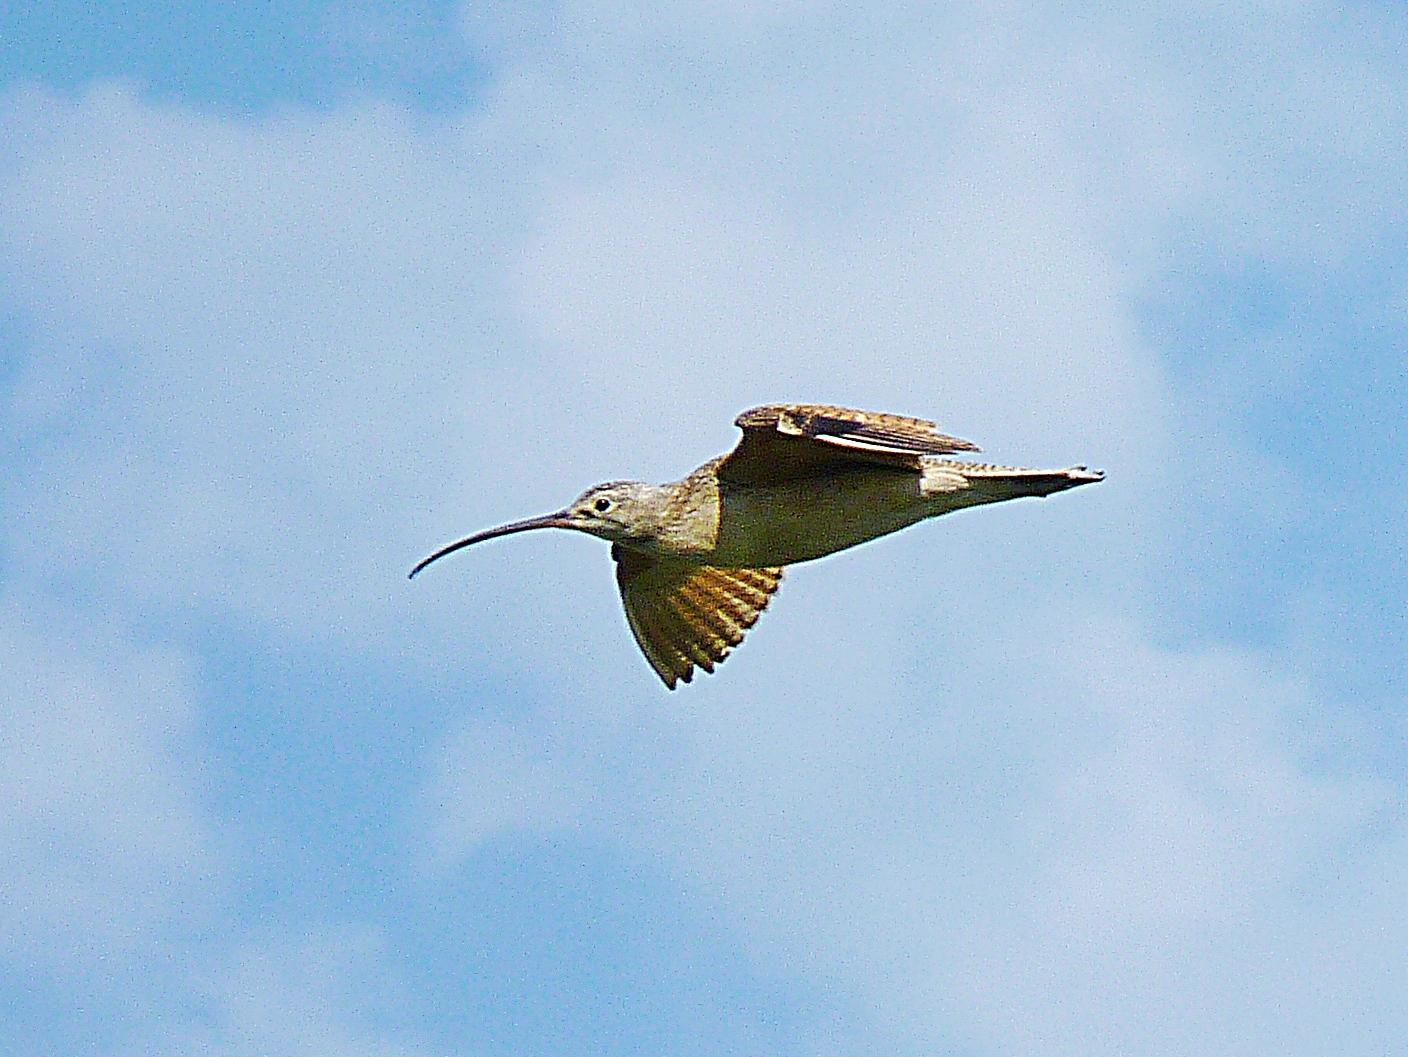 Long-billed Curlew Photo by Bob Neugebauer